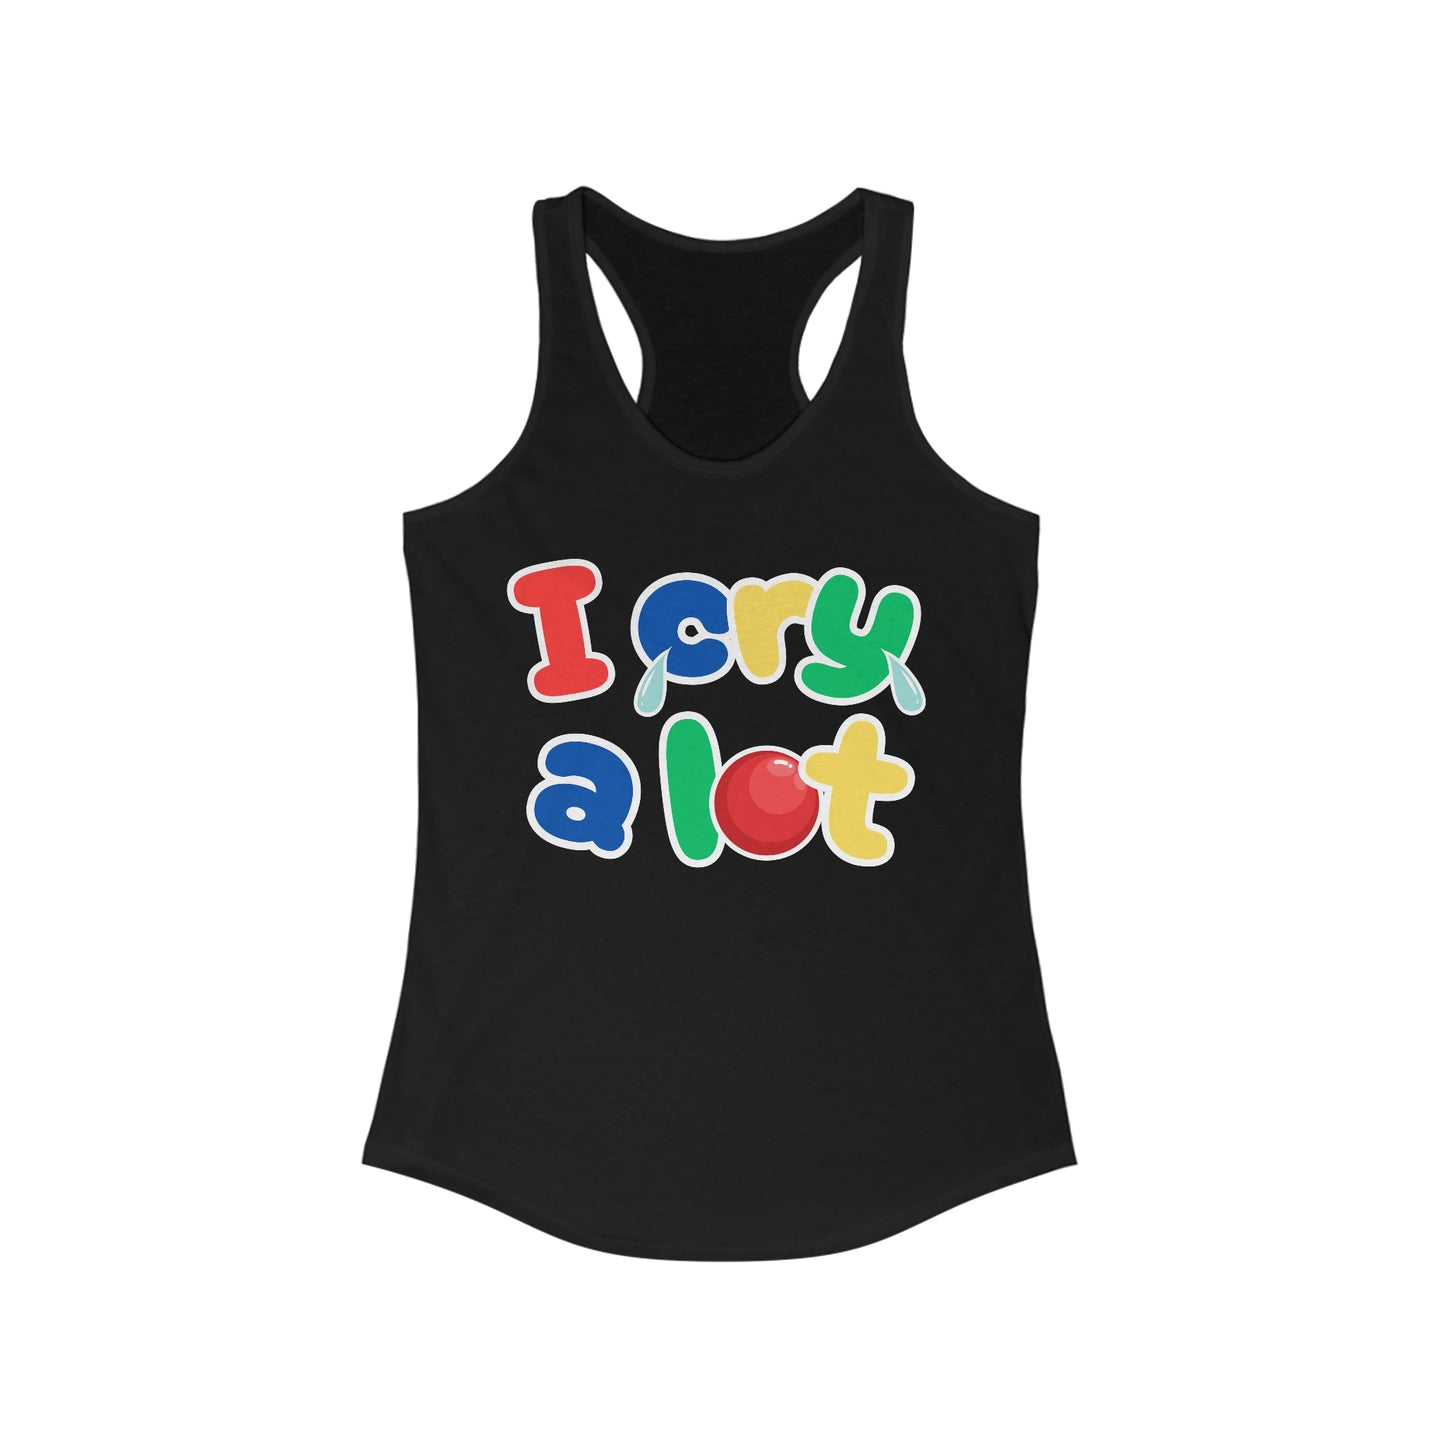 I Cry A Lot - Women's Ideal Racerback Tank